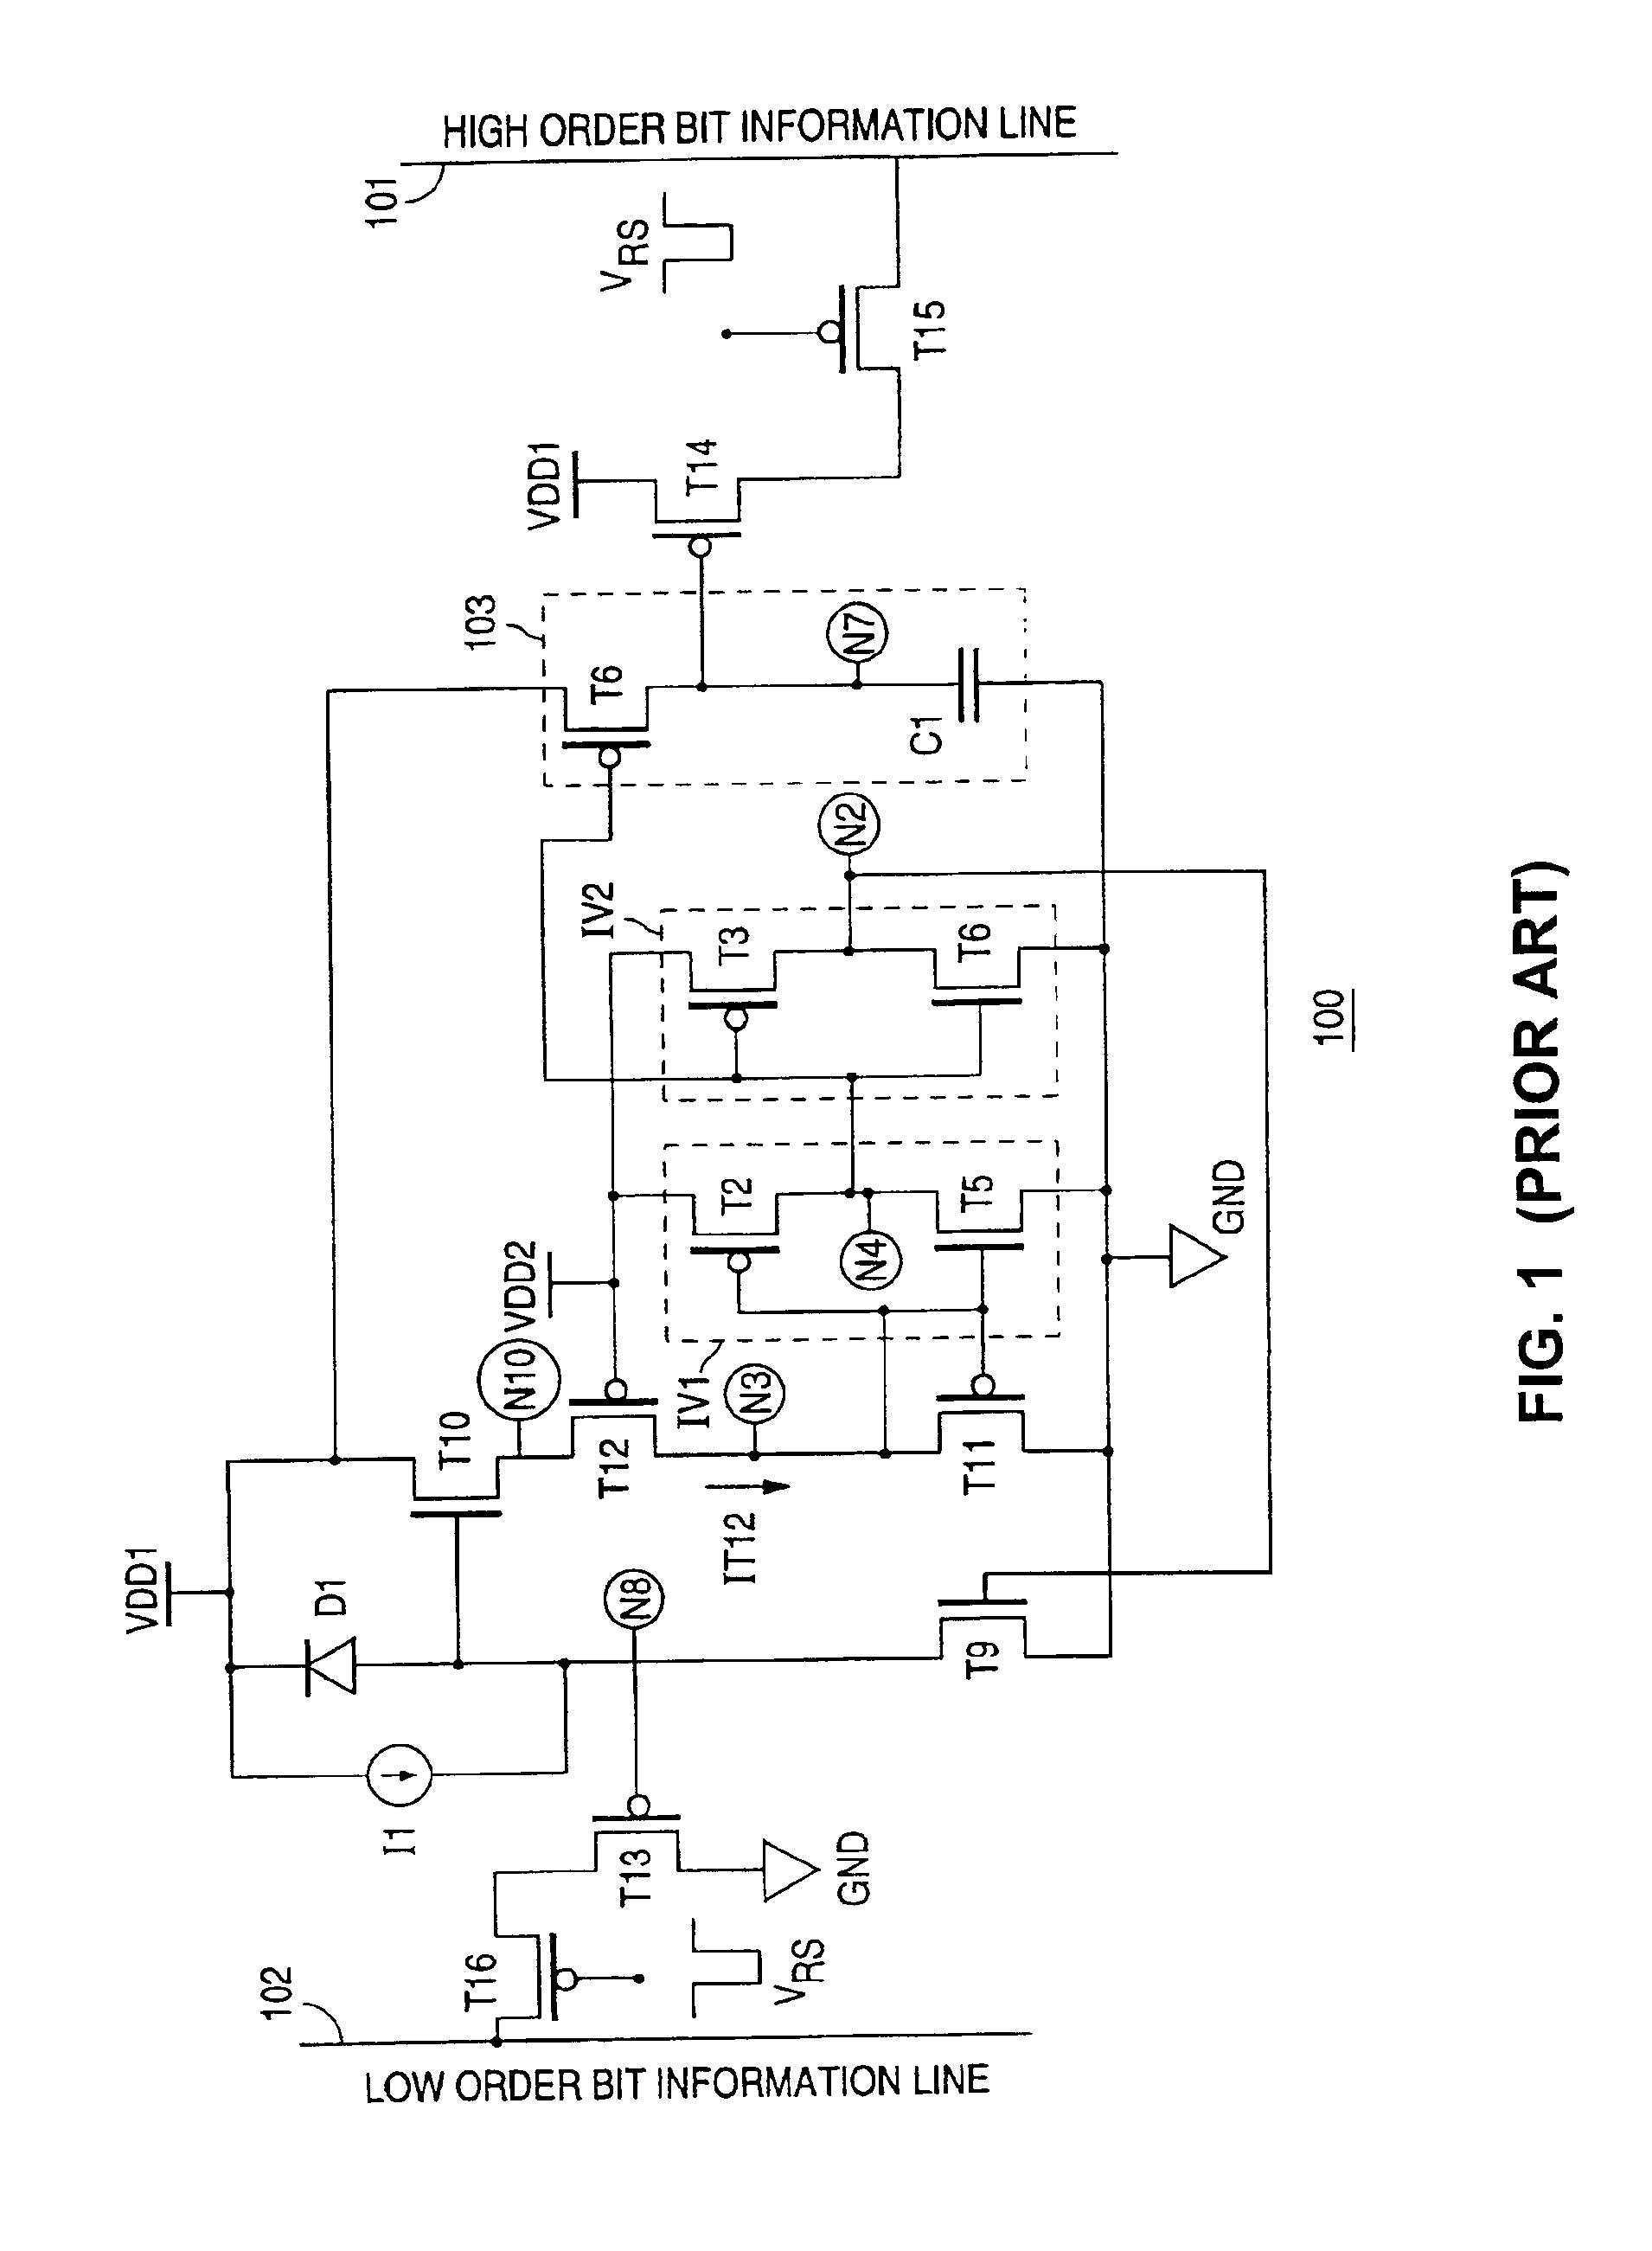 CMOS image sensor system with self-reset digital pixel architecture for improving SNR and dynamic range